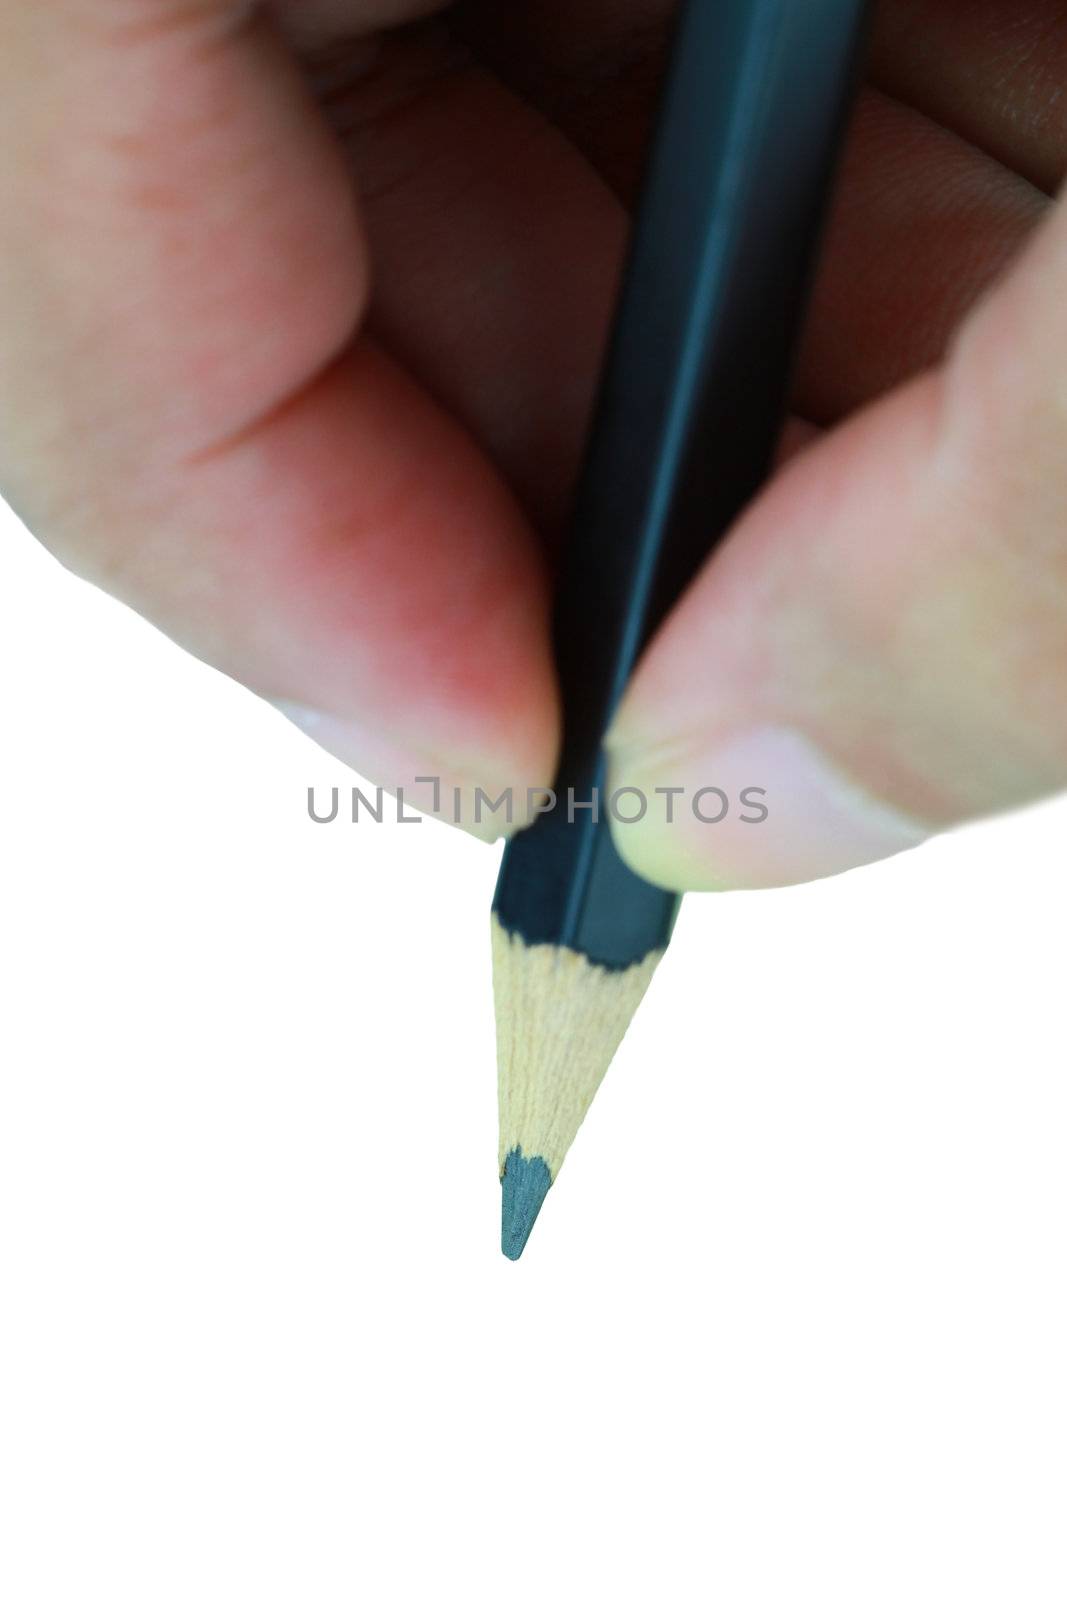 human hands with pencil and writting something